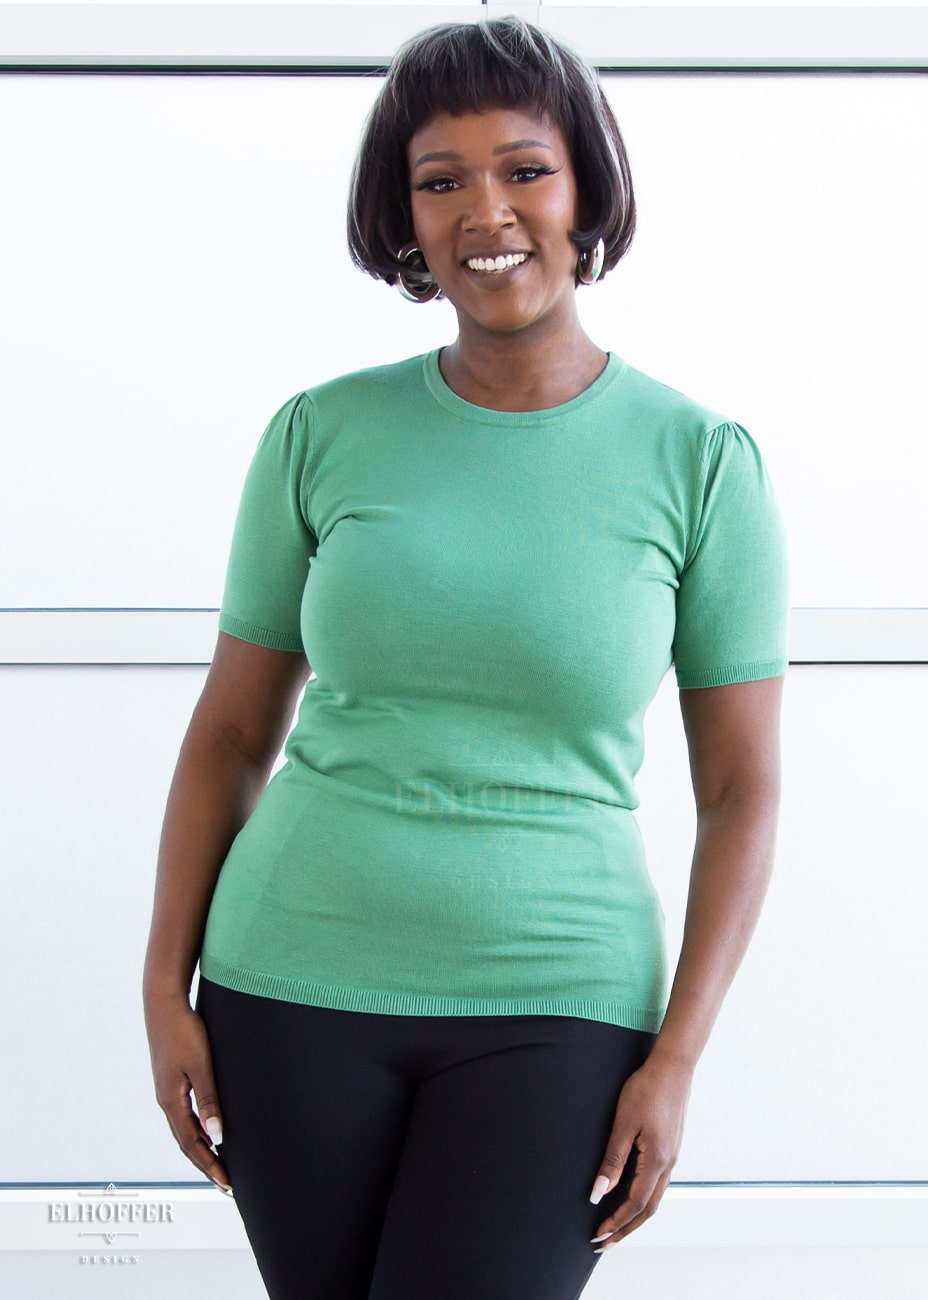 Lynsi, a medium dark skinned model with short black and white hair, is smiling while wearing a short sleeve light weight sage green knit top. The top hits about mid hip in length and the sleeves have pleated gathering at the shoulders.